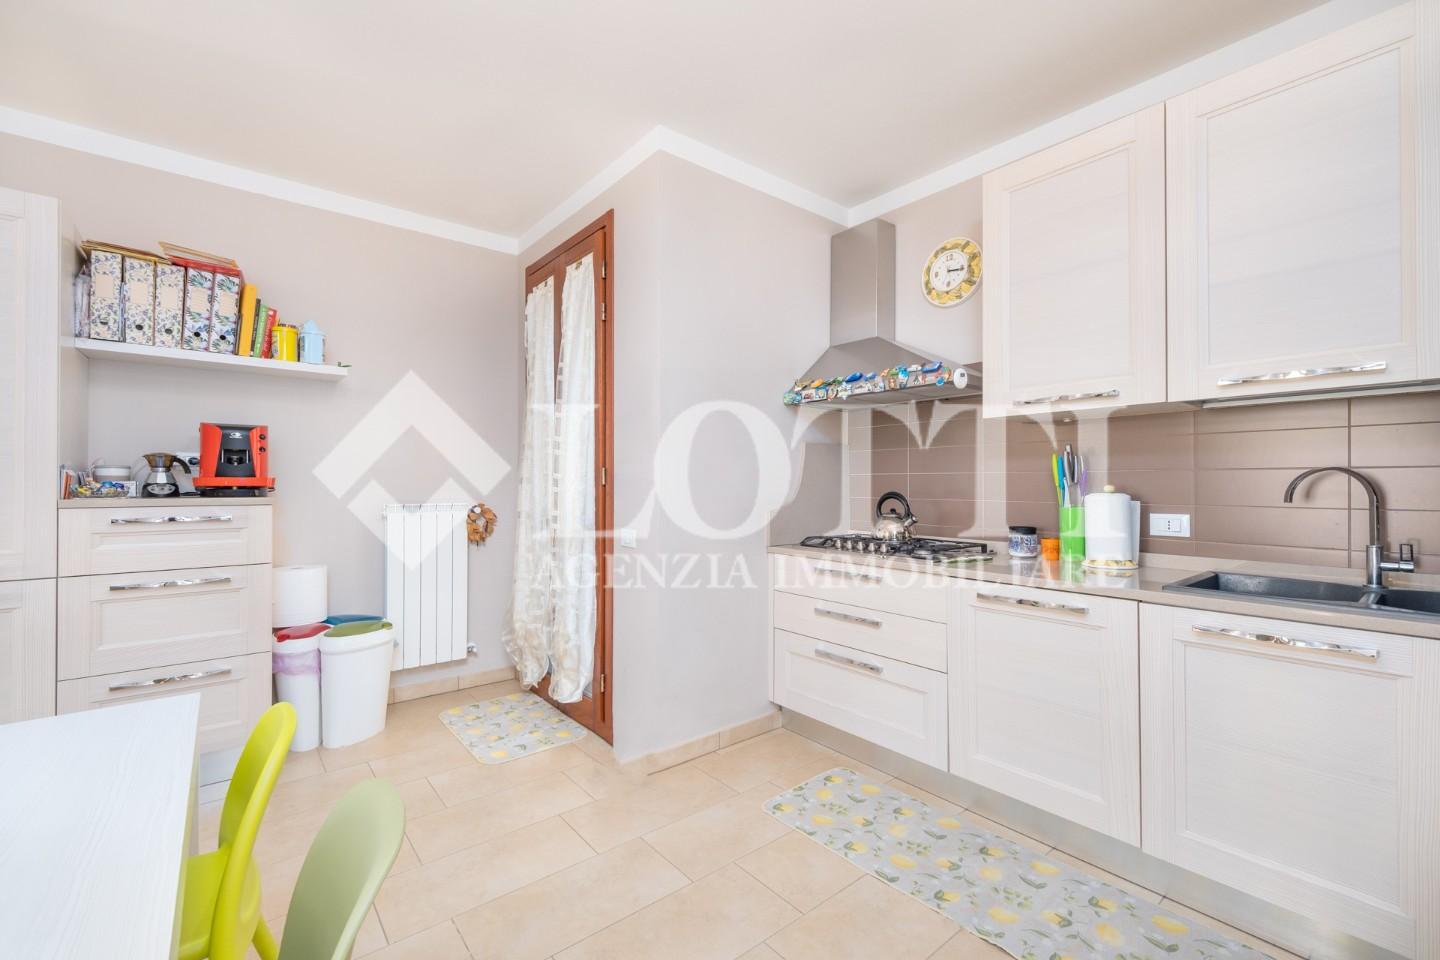 Terraced house for sale, ref. 818